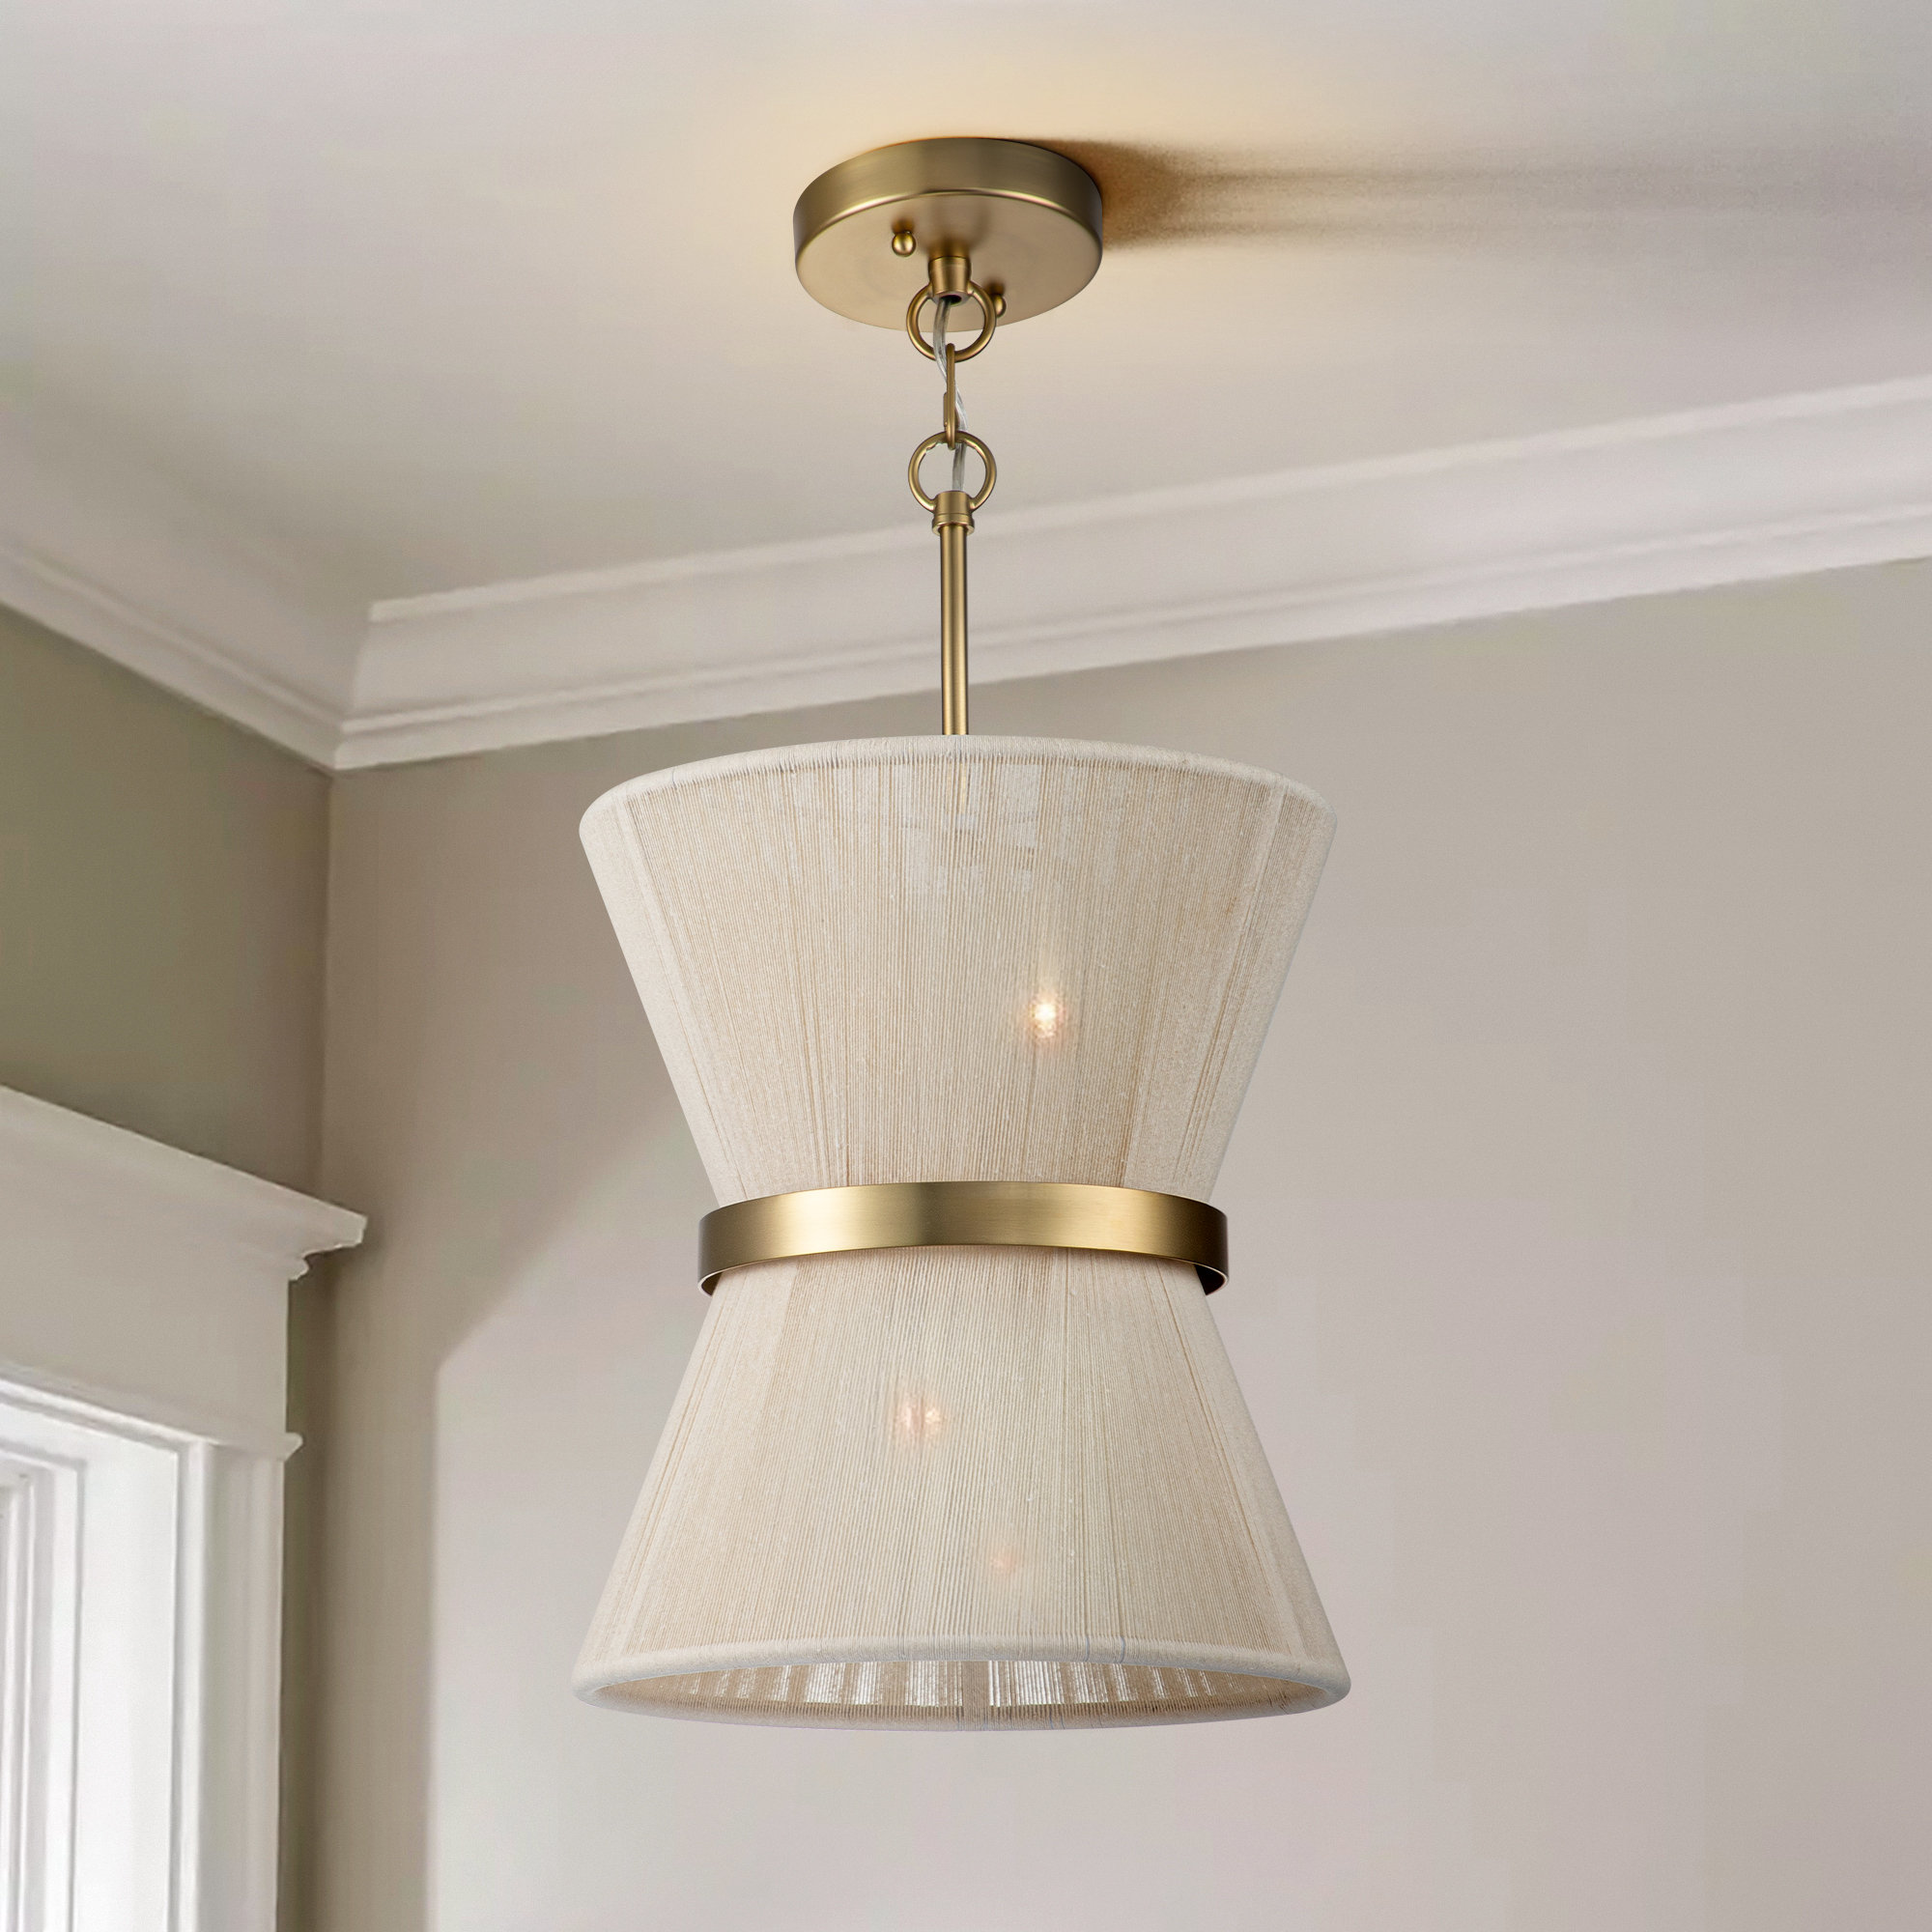 Claretta 2 - Light Bleached Natural Rope/Patinaed Brass Finish Joss & Main Shade Color: Bleached Natural Rope